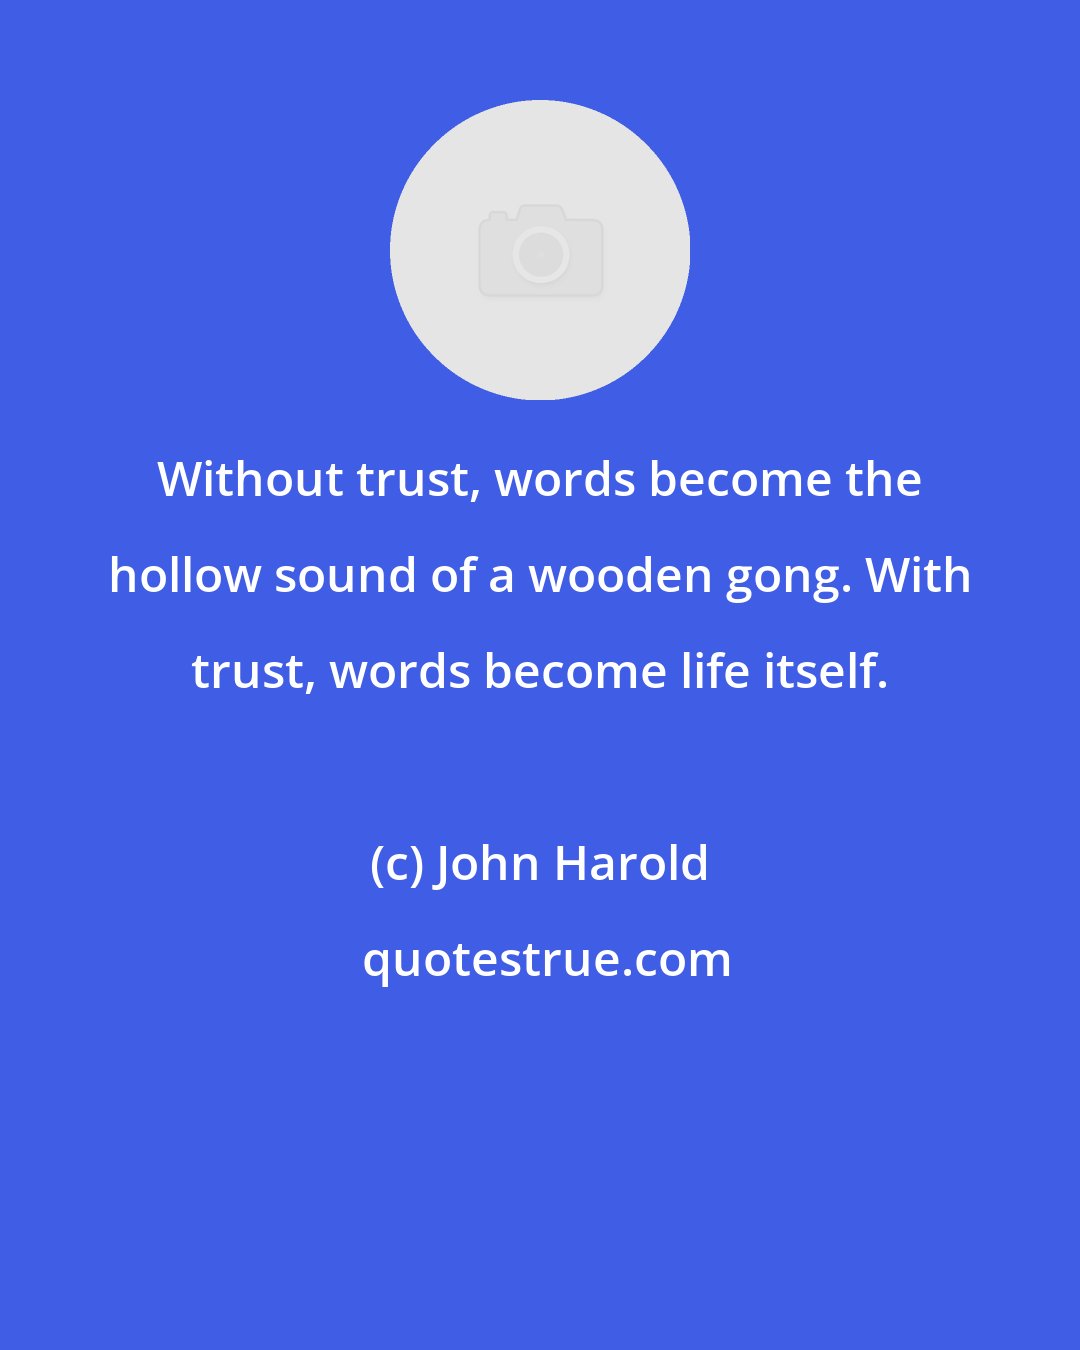 John Harold: Without trust, words become the hollow sound of a wooden gong. With trust, words become life itself.